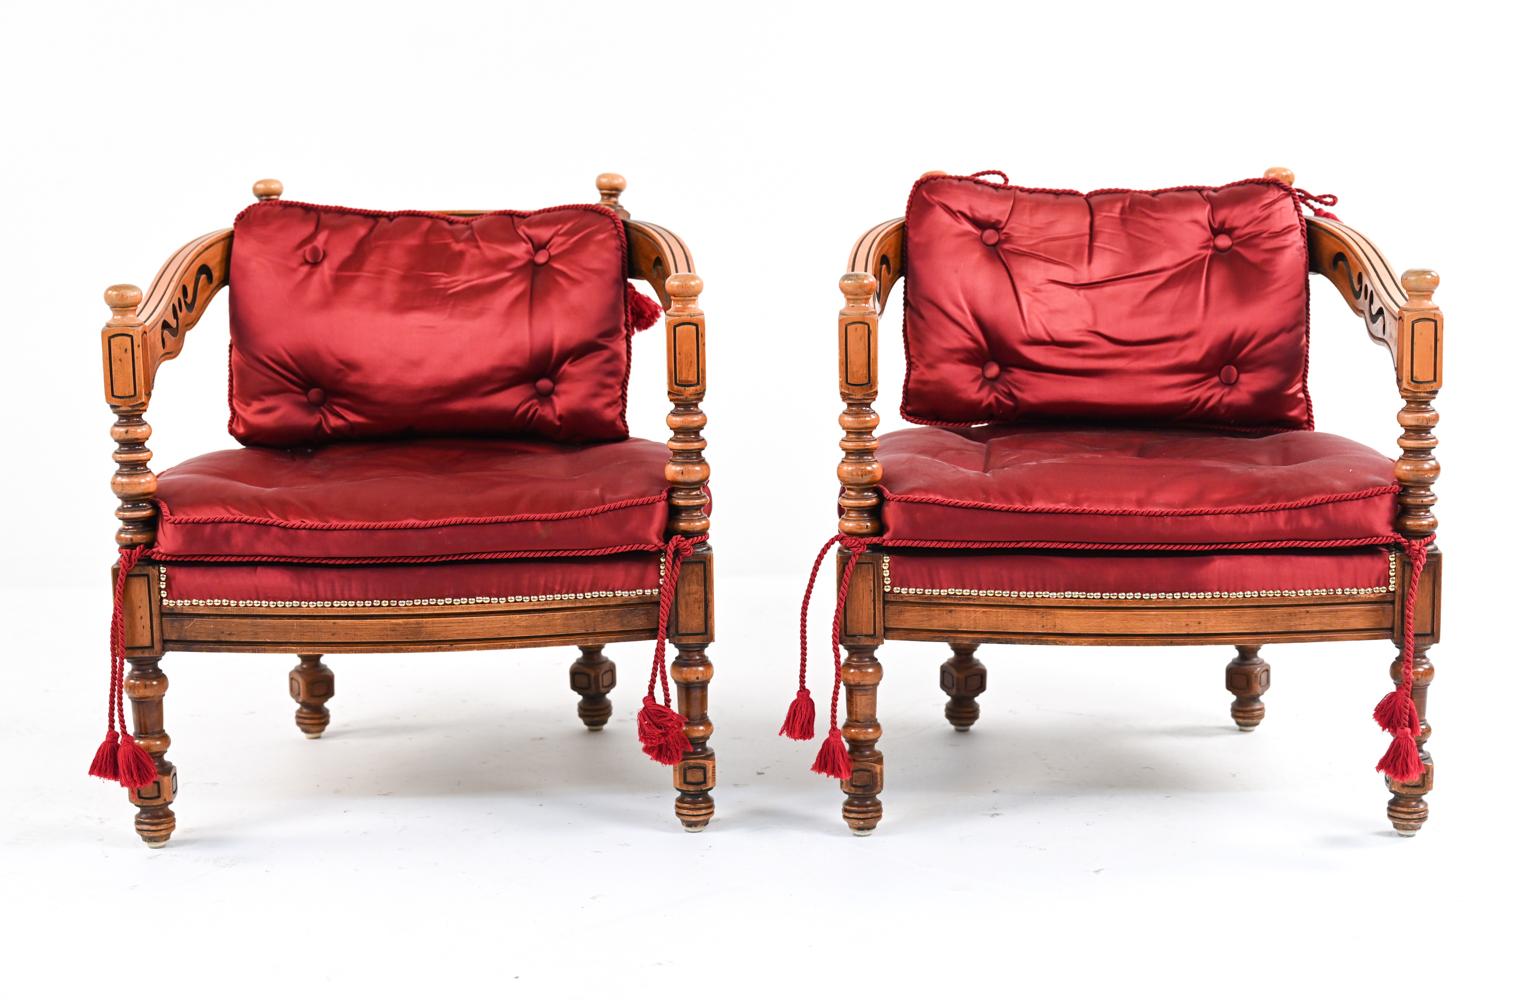 Add flair to your living space with this highly unique pair of Mediterranean Gothic Revival armchairs, featuring open carving, polished brass nailhead trim, and dramatic burgundy satin upholstery with corded tassels. Circa Early- to Mid-20th Century.